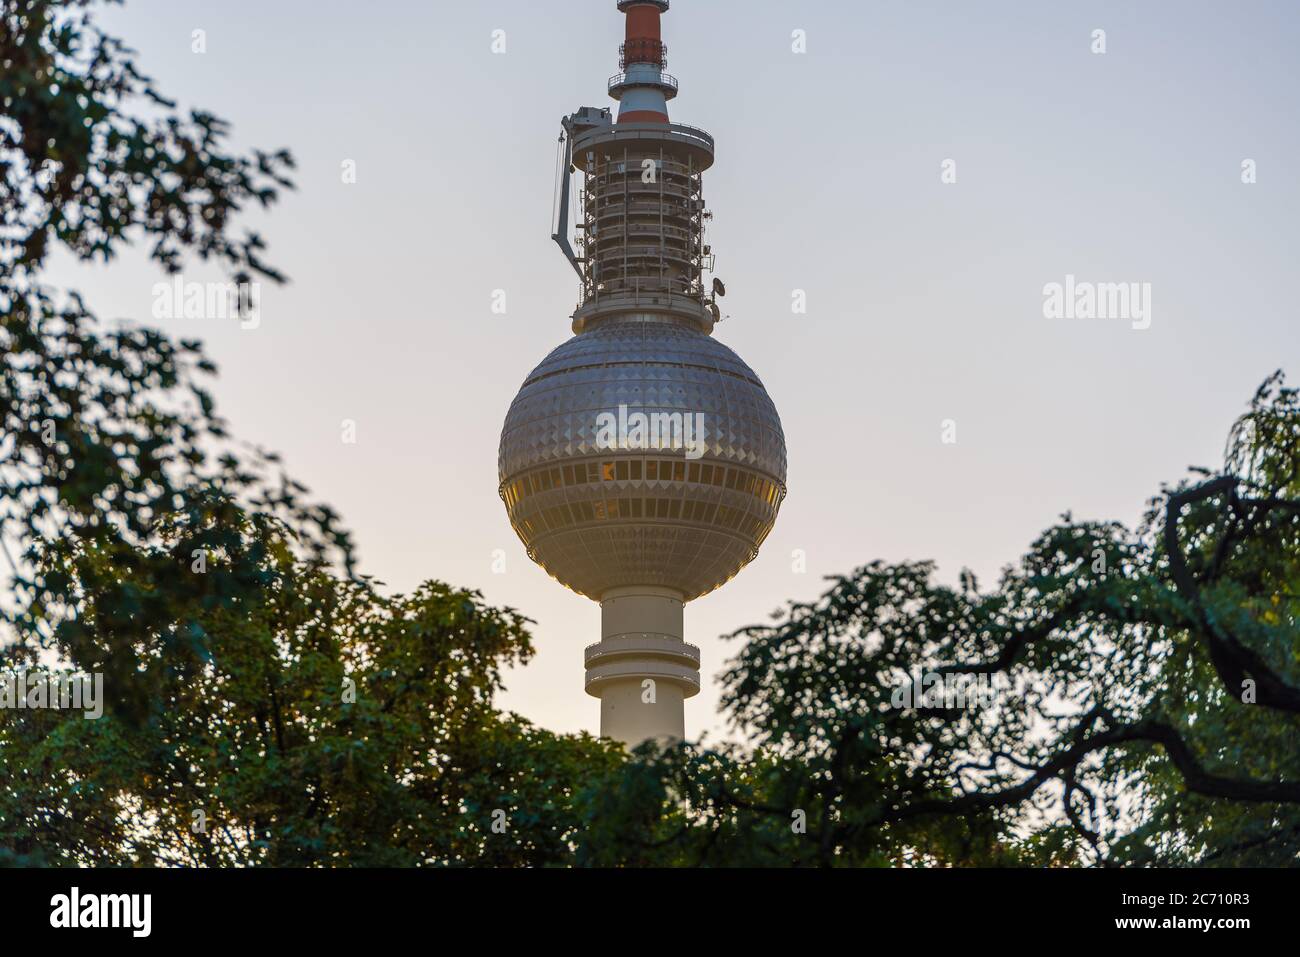 BERLIN, GERMANY - SEPTEMBER 17, 2013: The Fernsehturm Television Tower IN BERLIN. Stock Photo